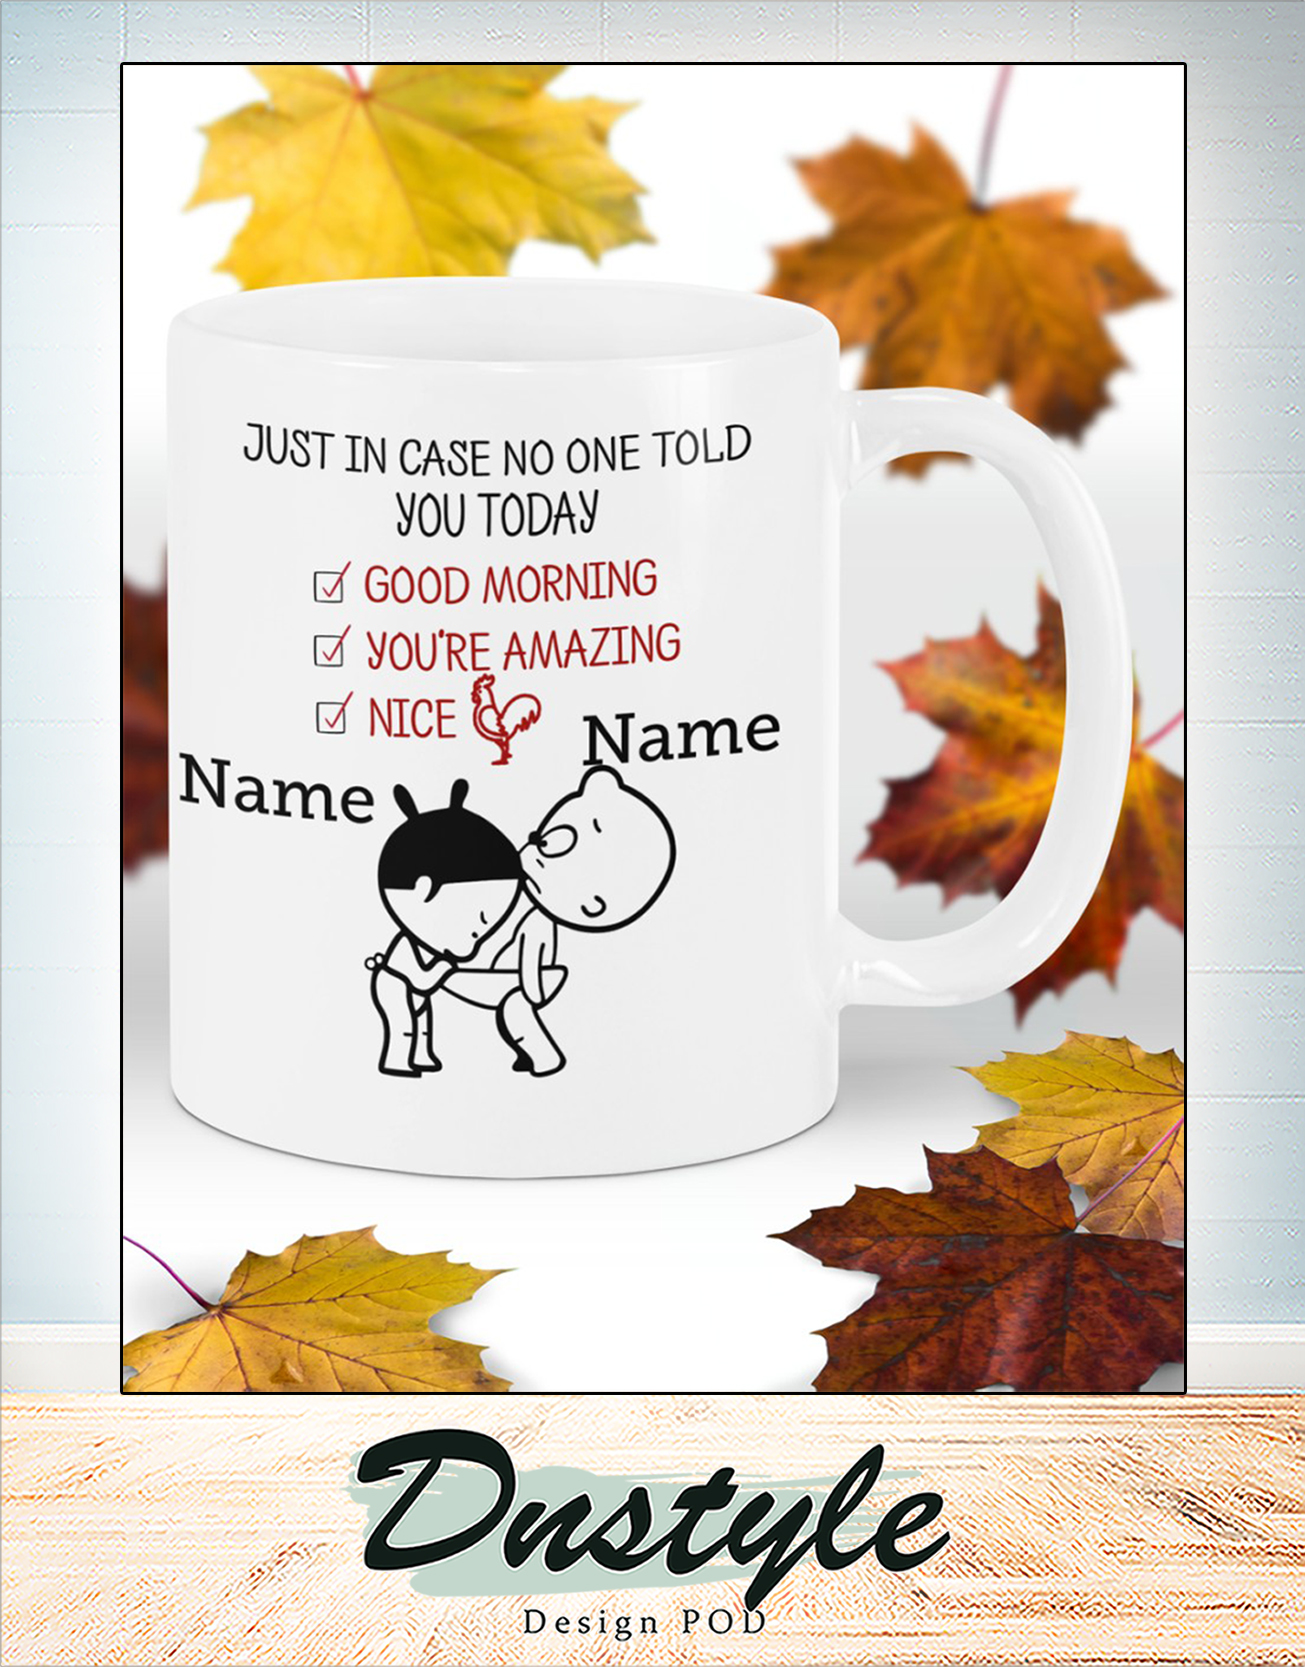 Personalized custom name just in case no one told you today mug 2